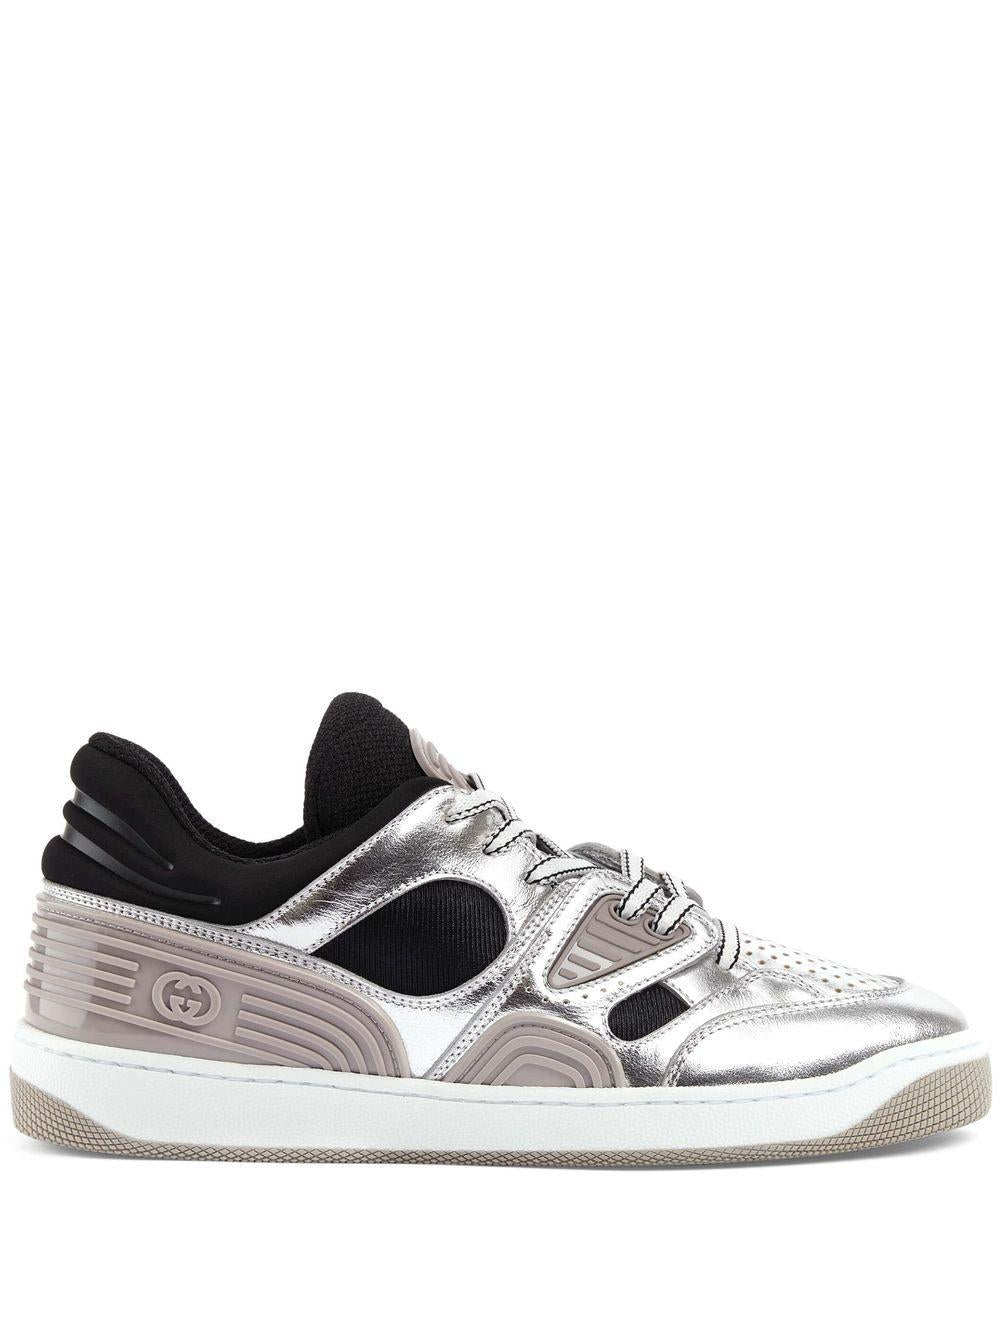 Gucci Elevate Your Style With This Silver And Black Metallic-leather Sneaker In Gray